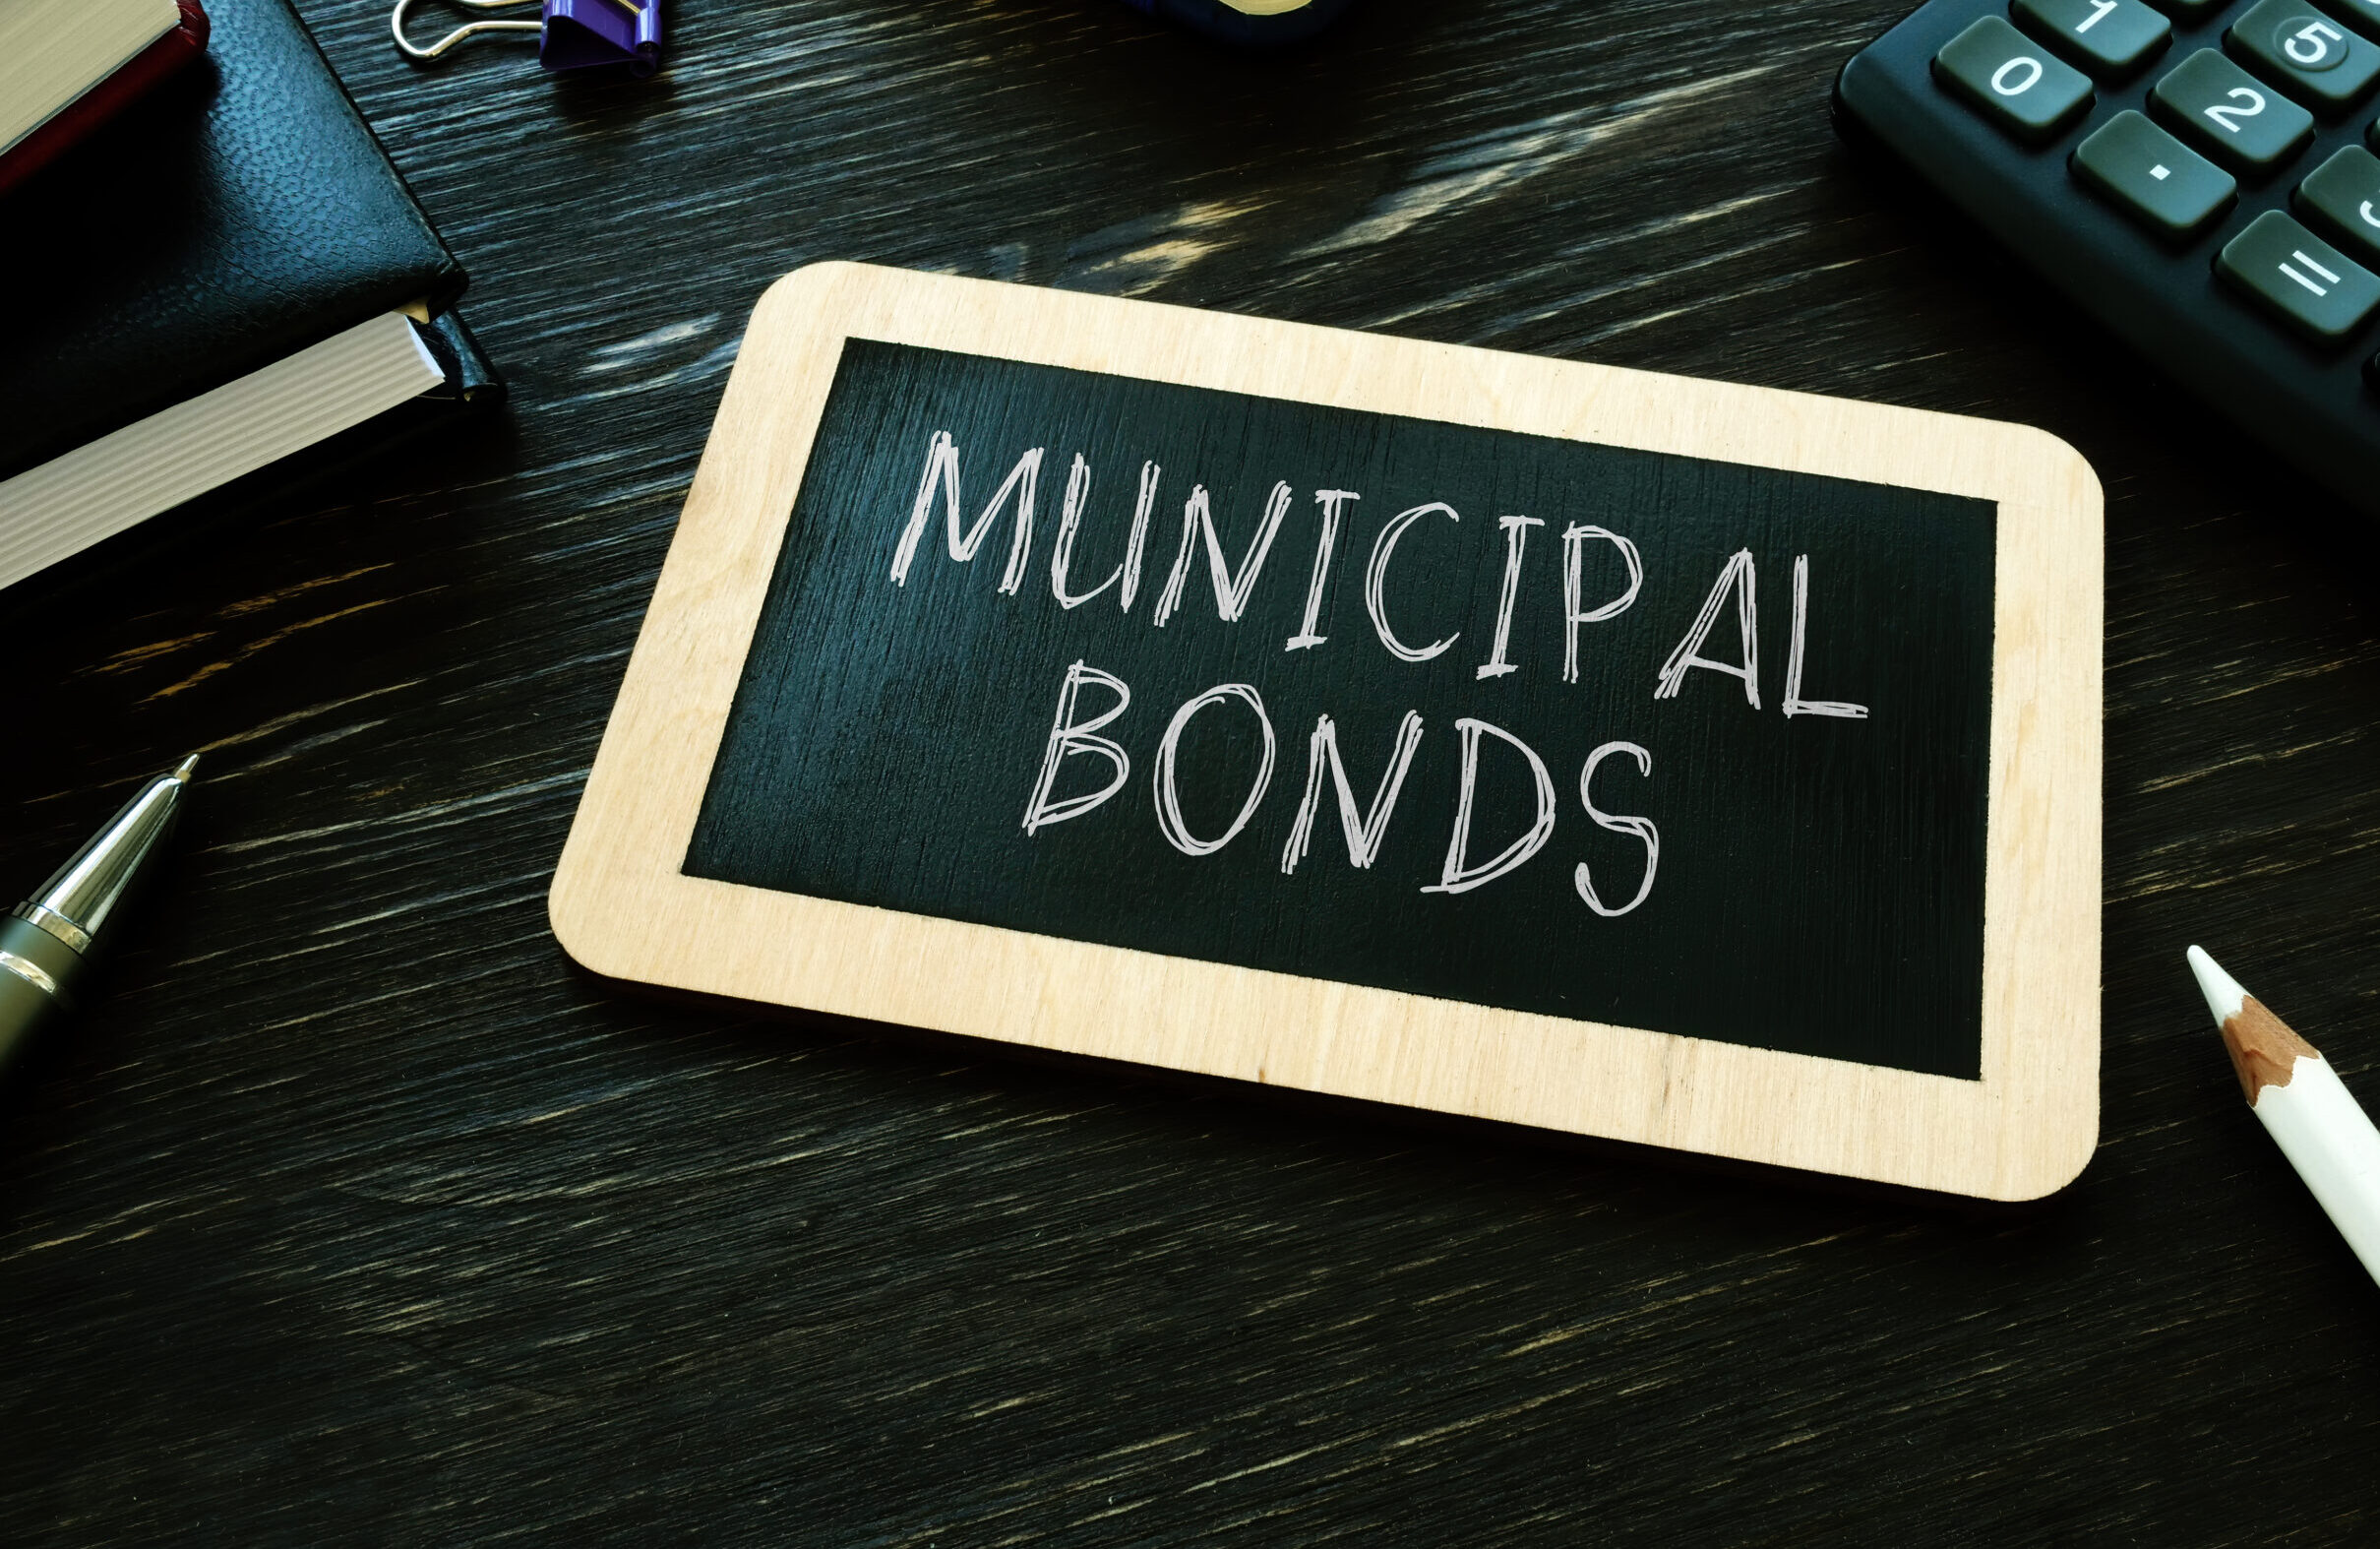 Municipal Bonds - Fueling Investment And Community Growth